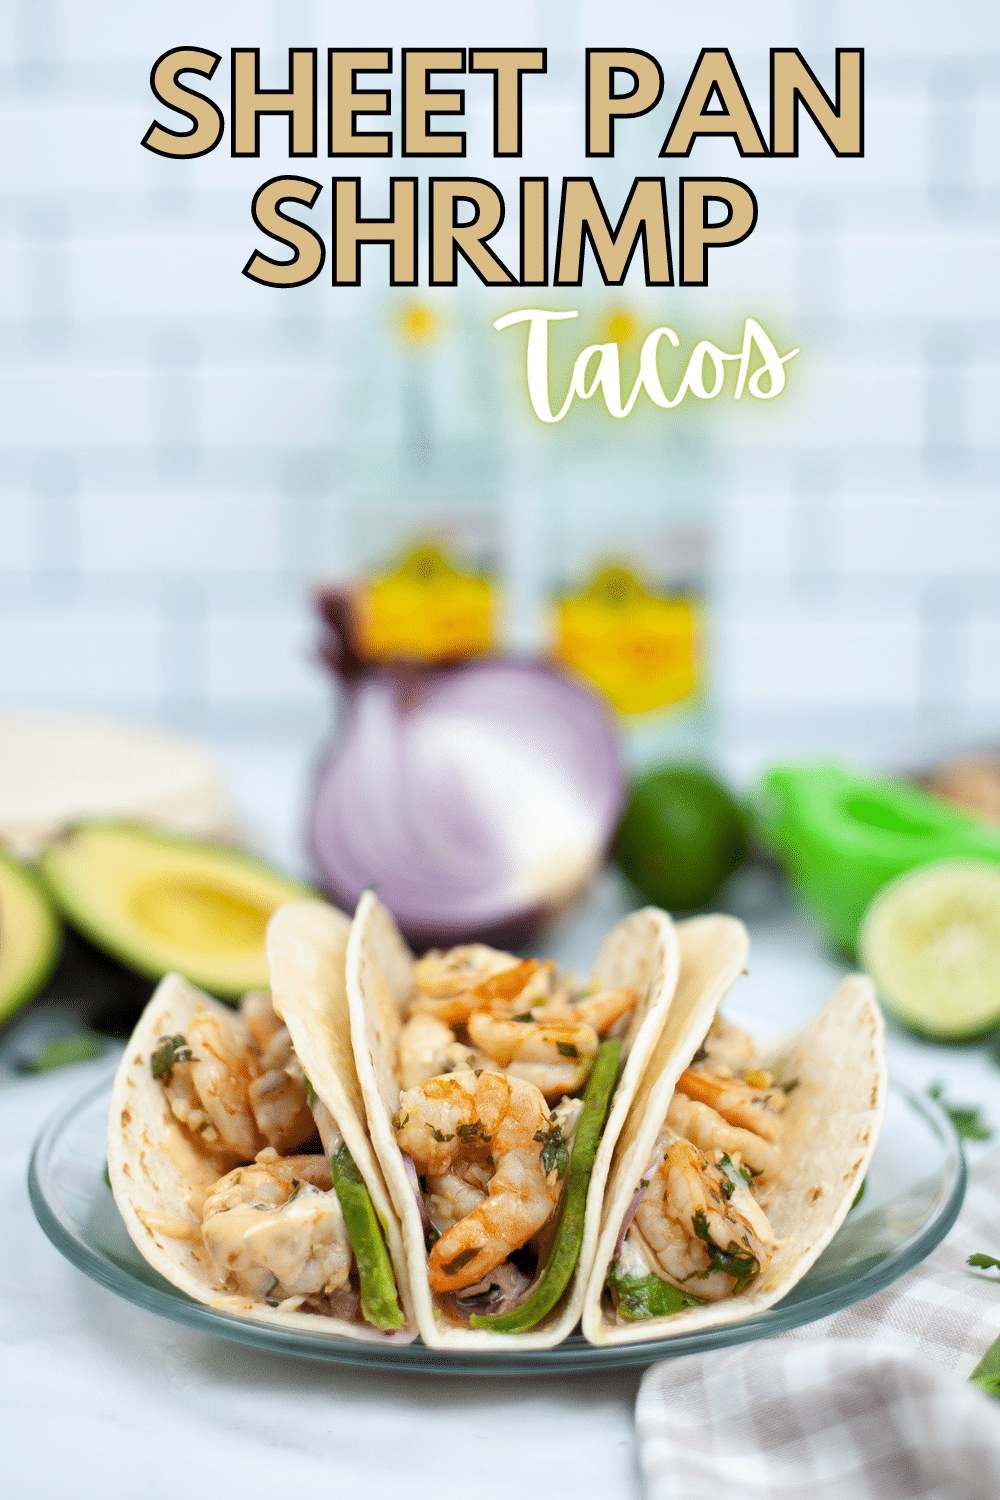 Sheet Pan Shrimp Tacos on a glass plate with an avocado, onion and limes blurred in the background with title text reading Sheet Pan Shrimp Tacos